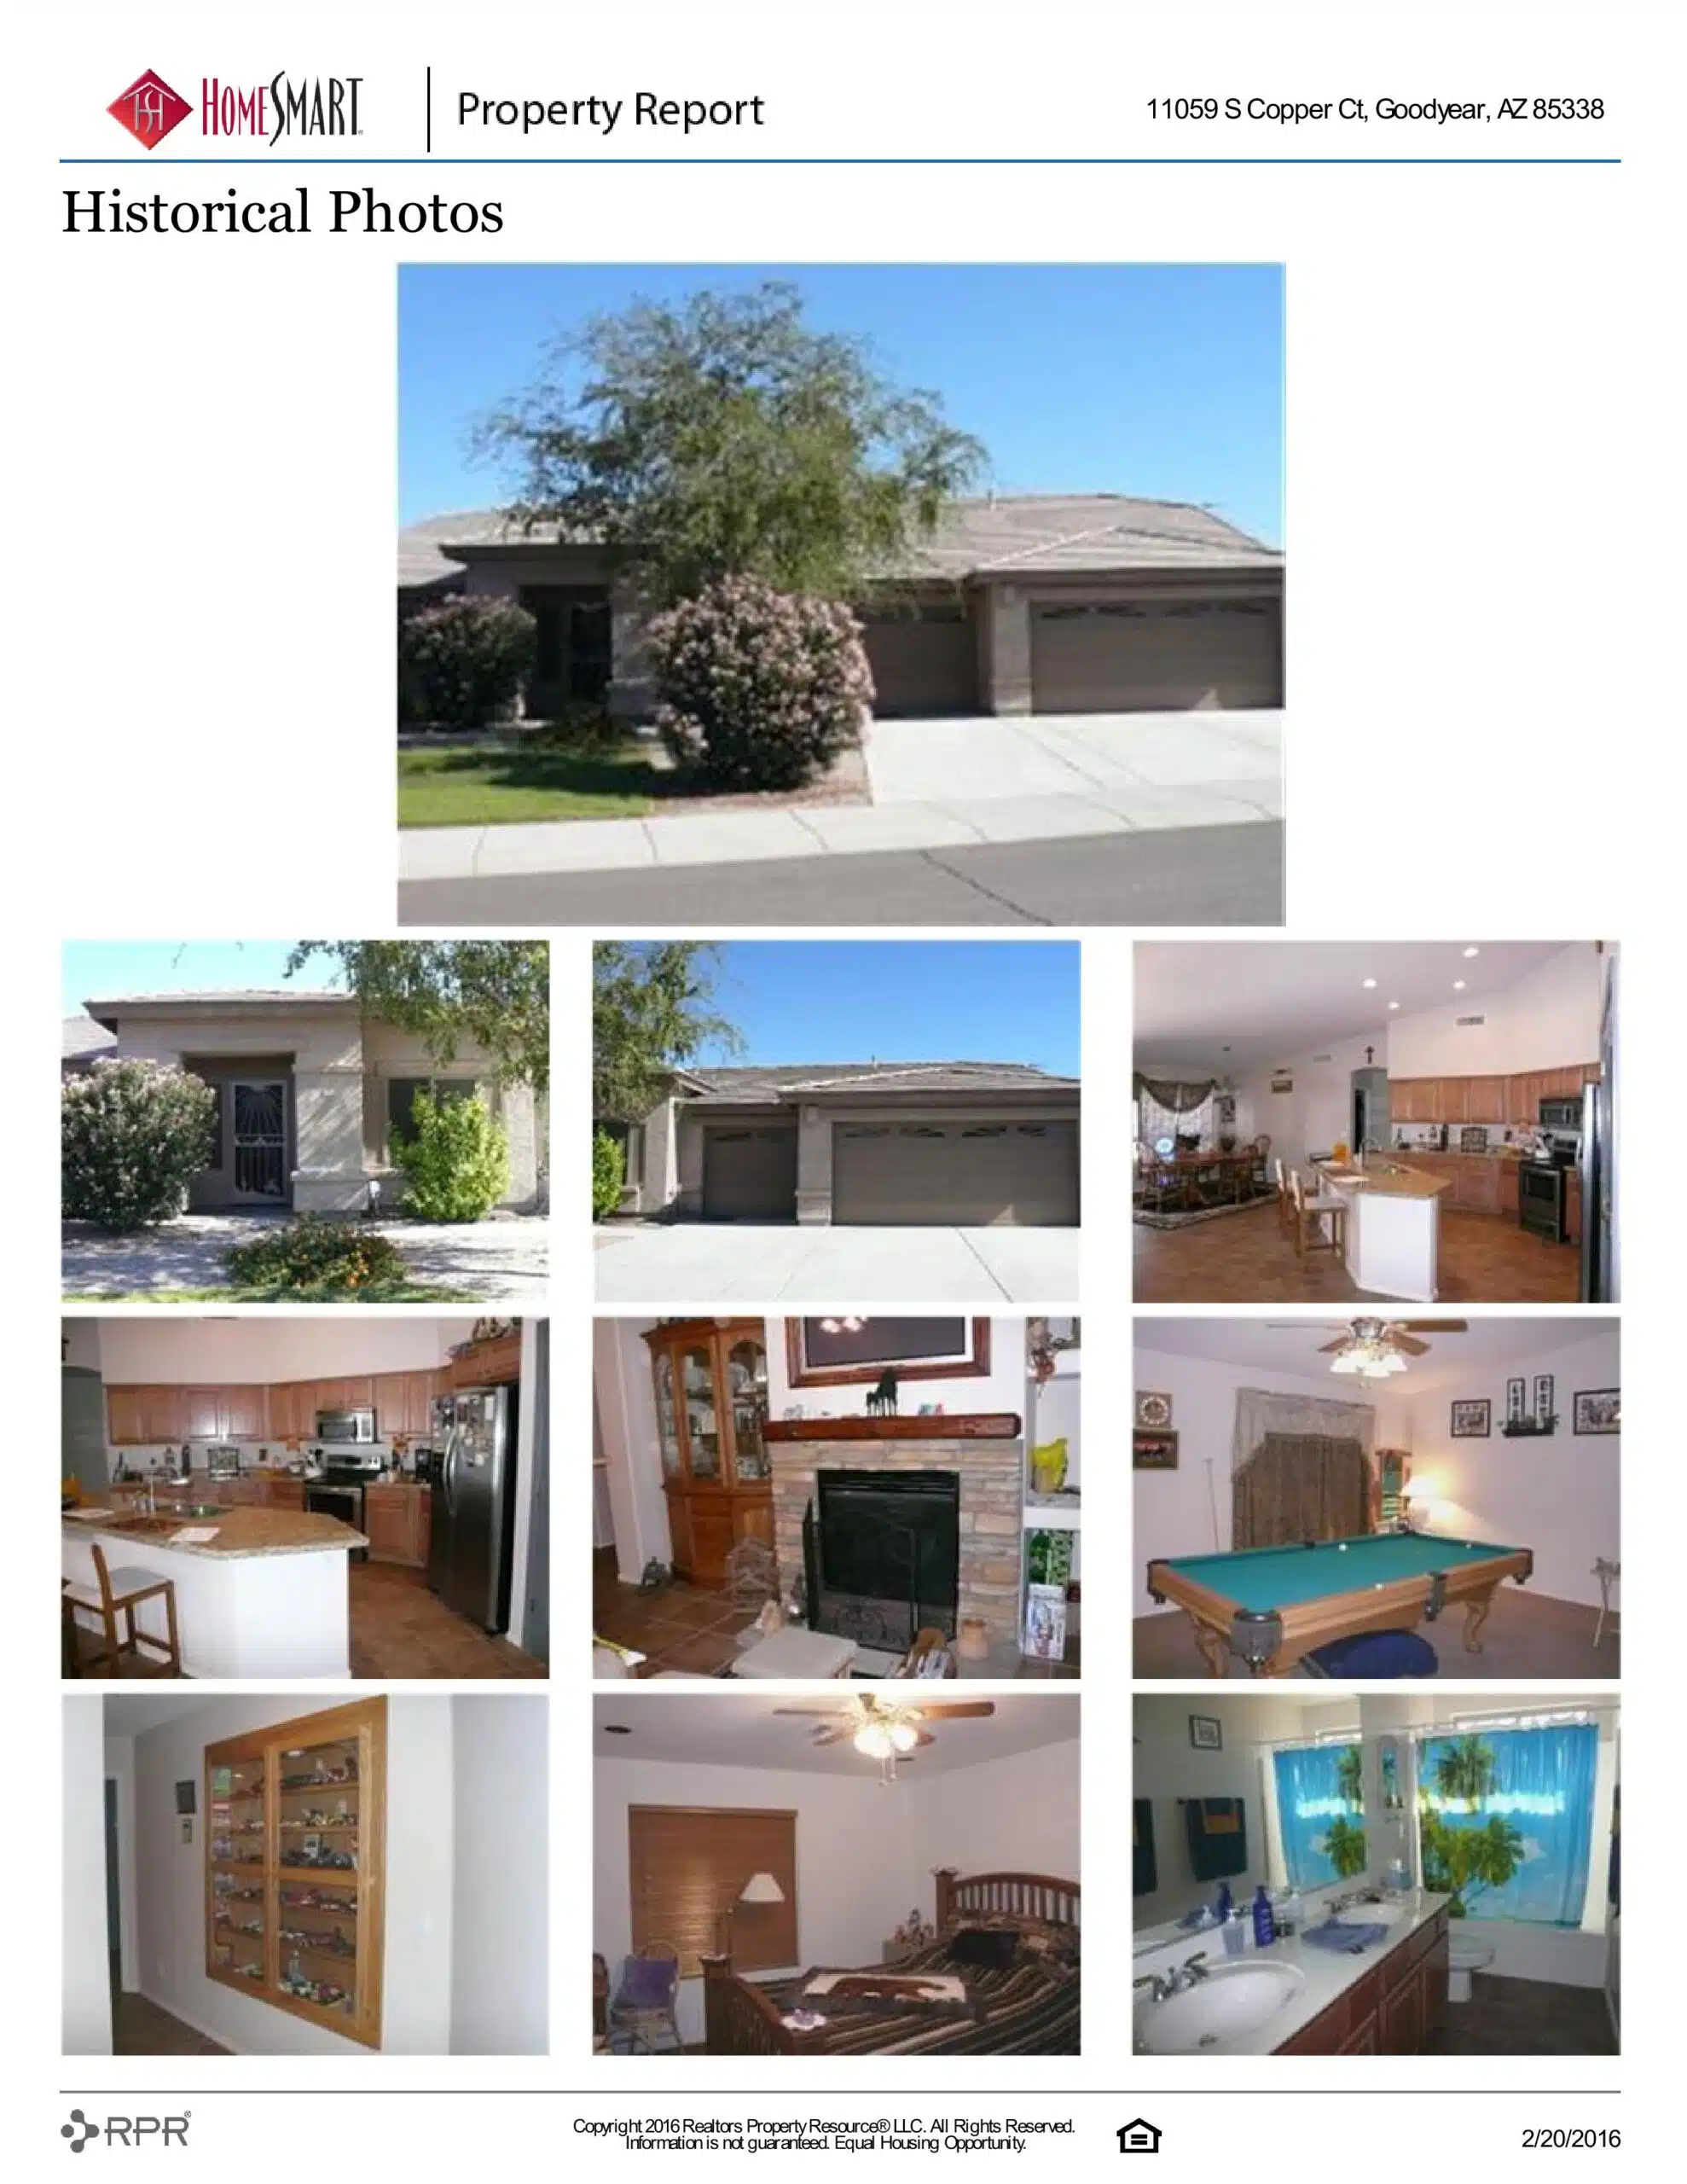 11059 S COPPER CT PROPERTY REPORT-page-008